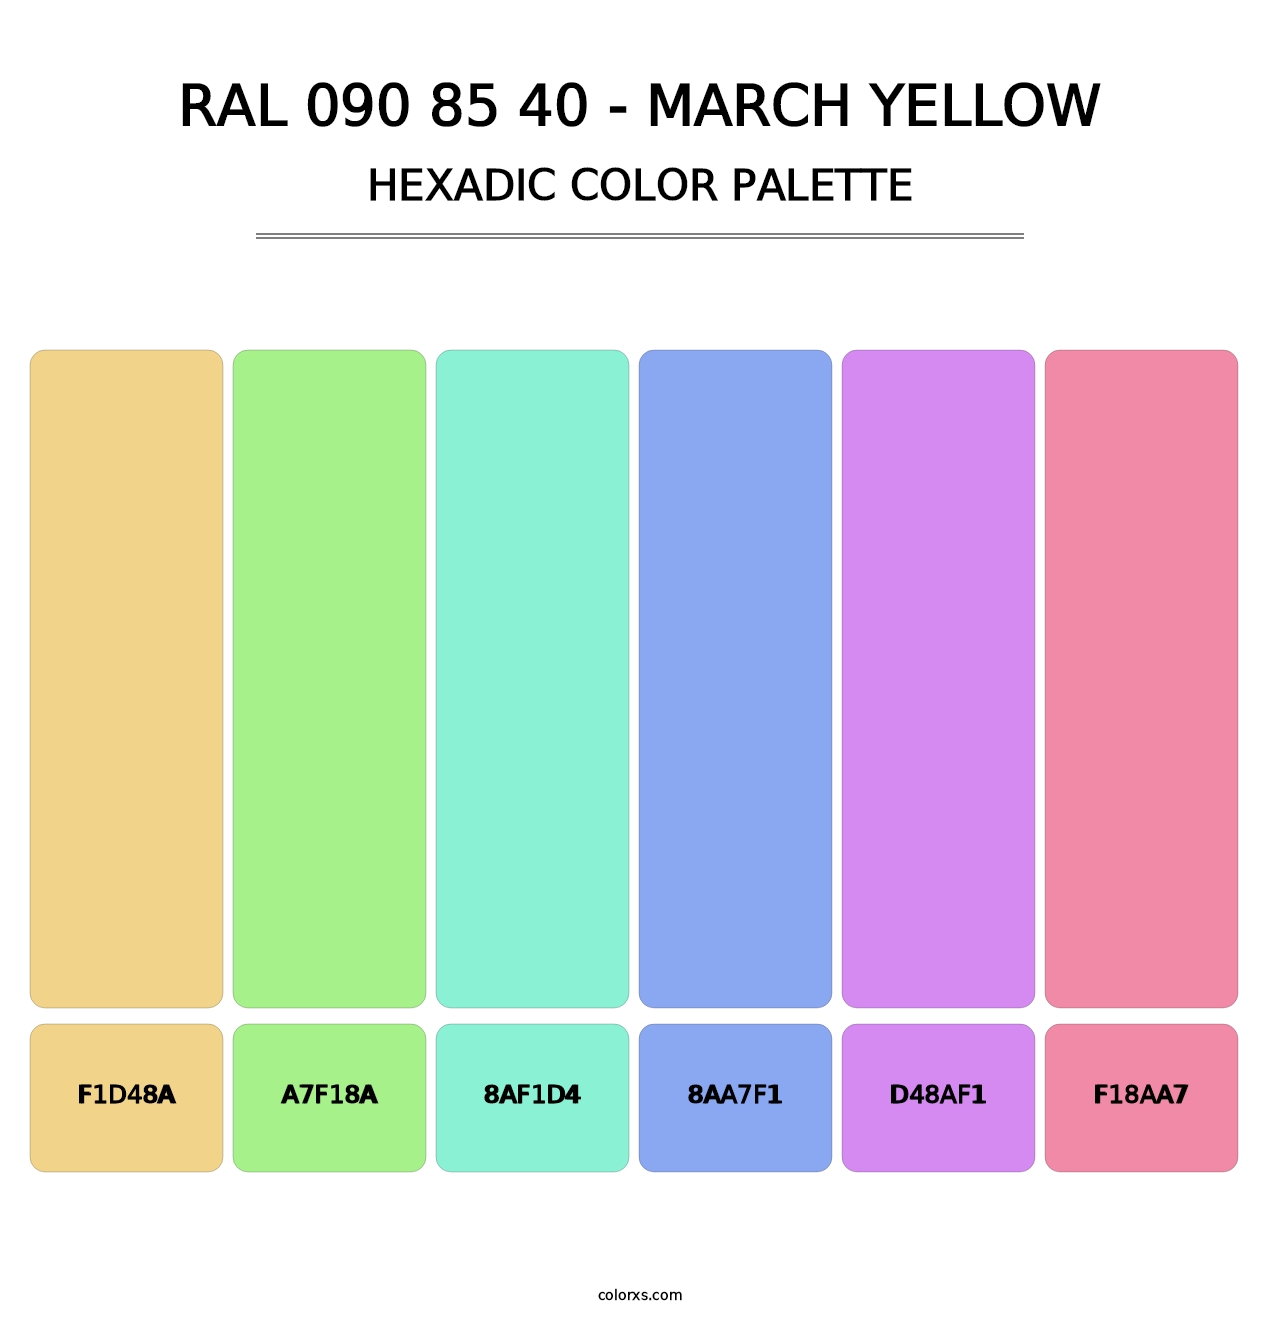 RAL 090 85 40 - March Yellow - Hexadic Color Palette